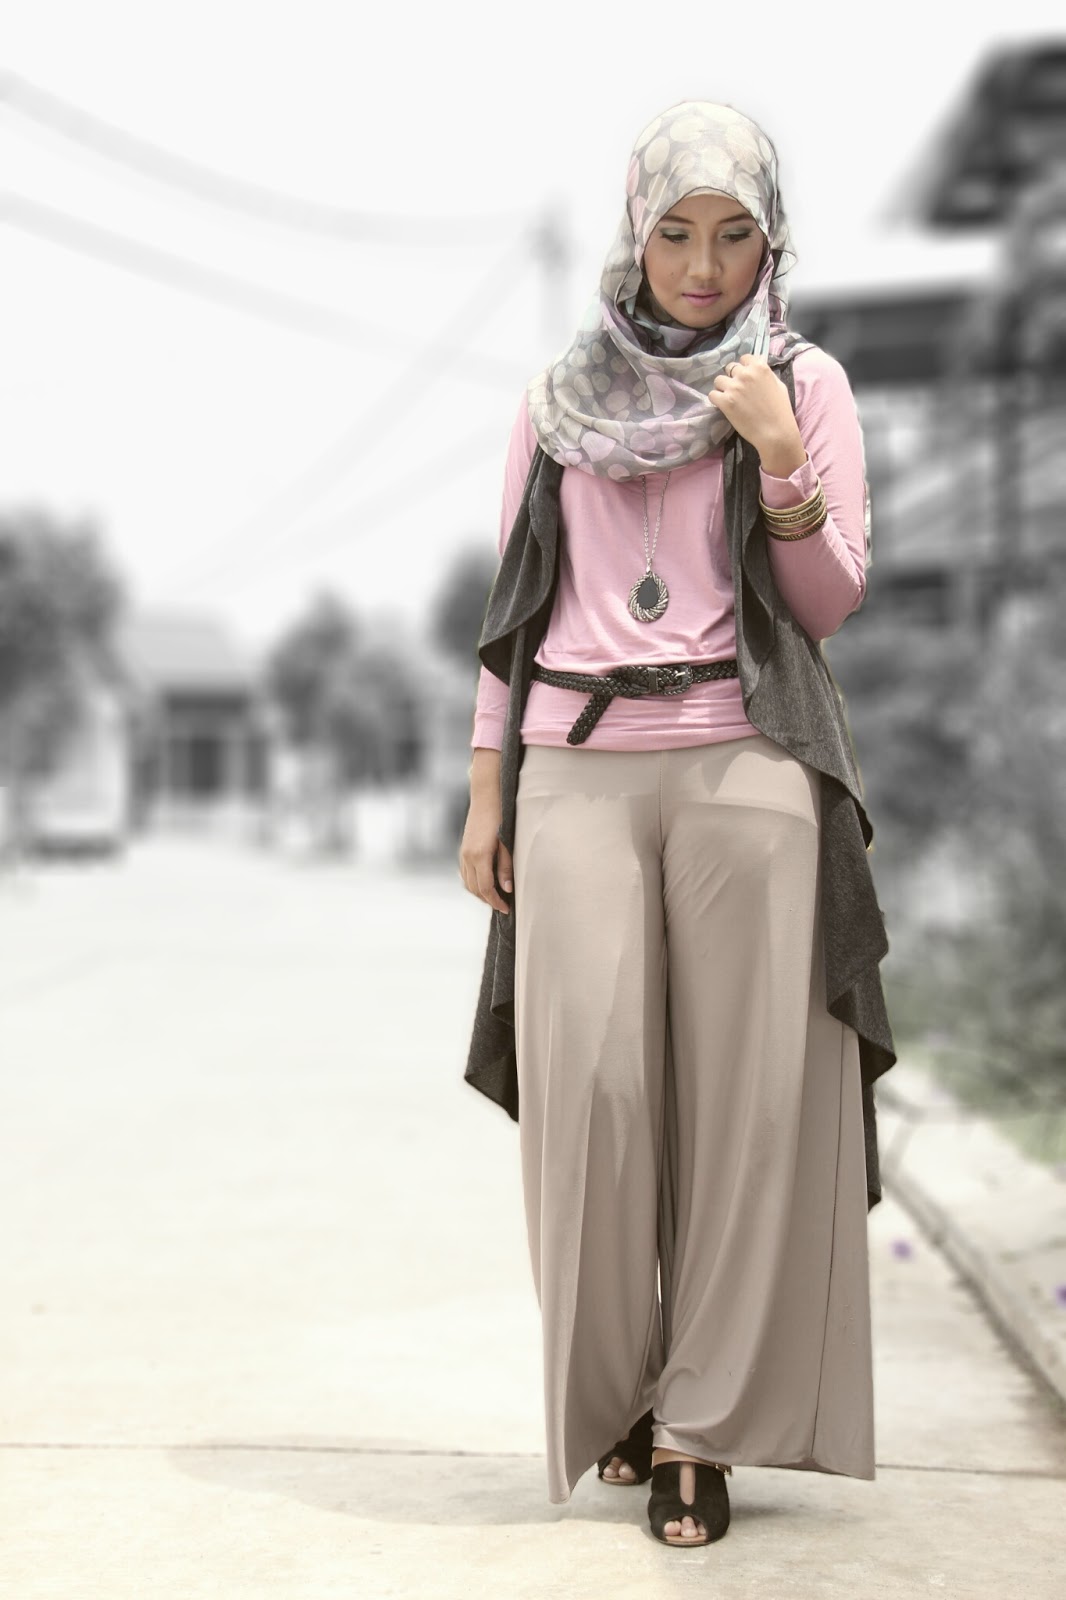 Tajma hijab style: How To Look Pretty and Cool Wearing a 